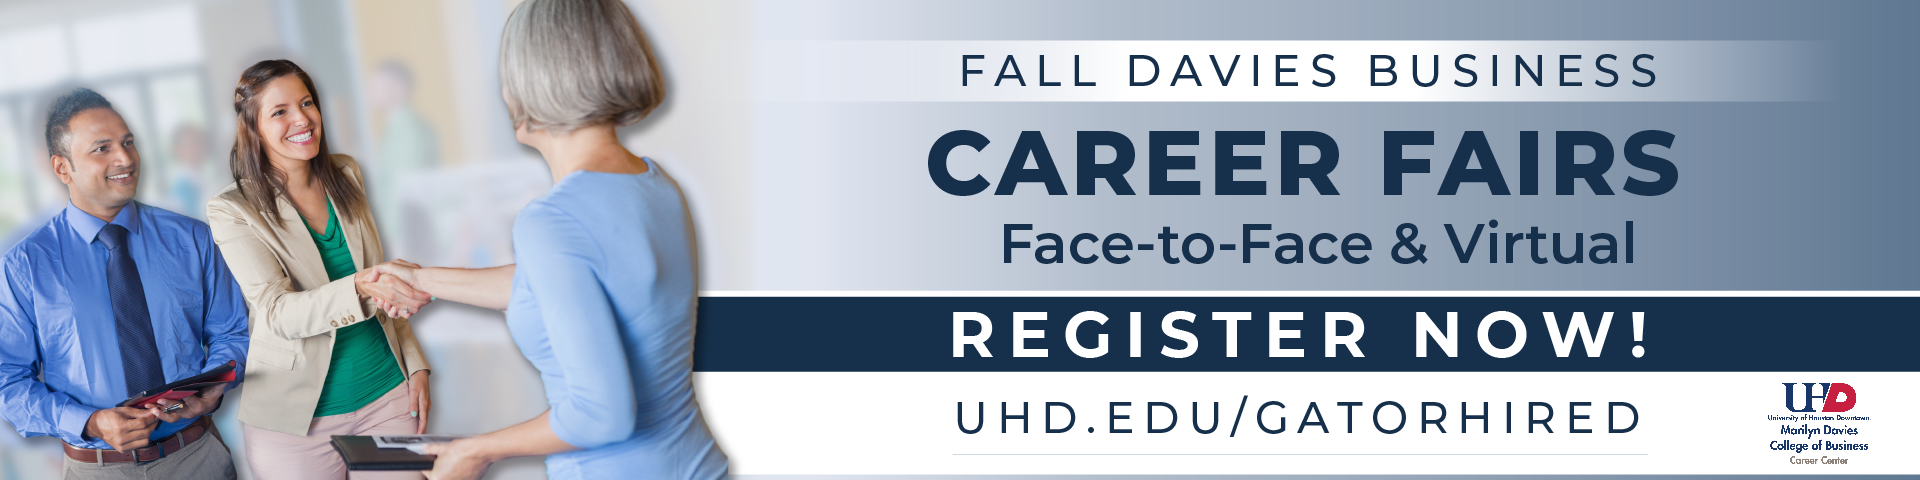 Fall Career Fairs now open for registration